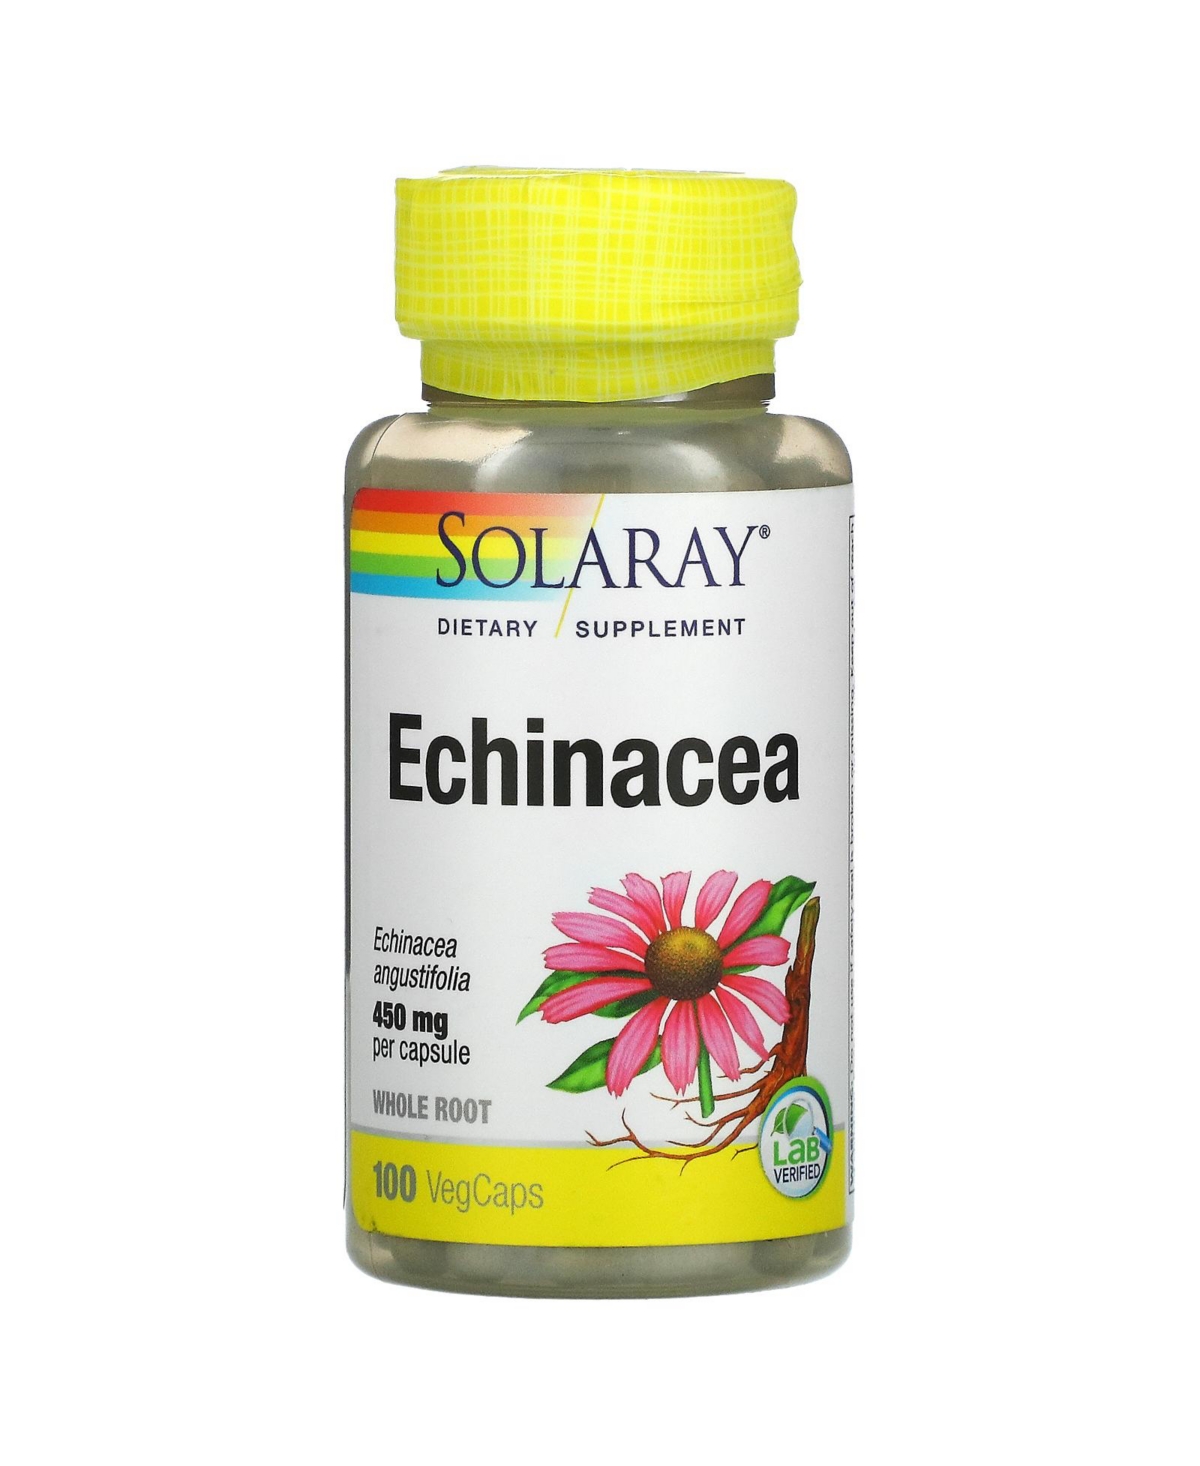 Echinacea 450 mg - 100 VegCaps - Assorted Pre-pack (See Table